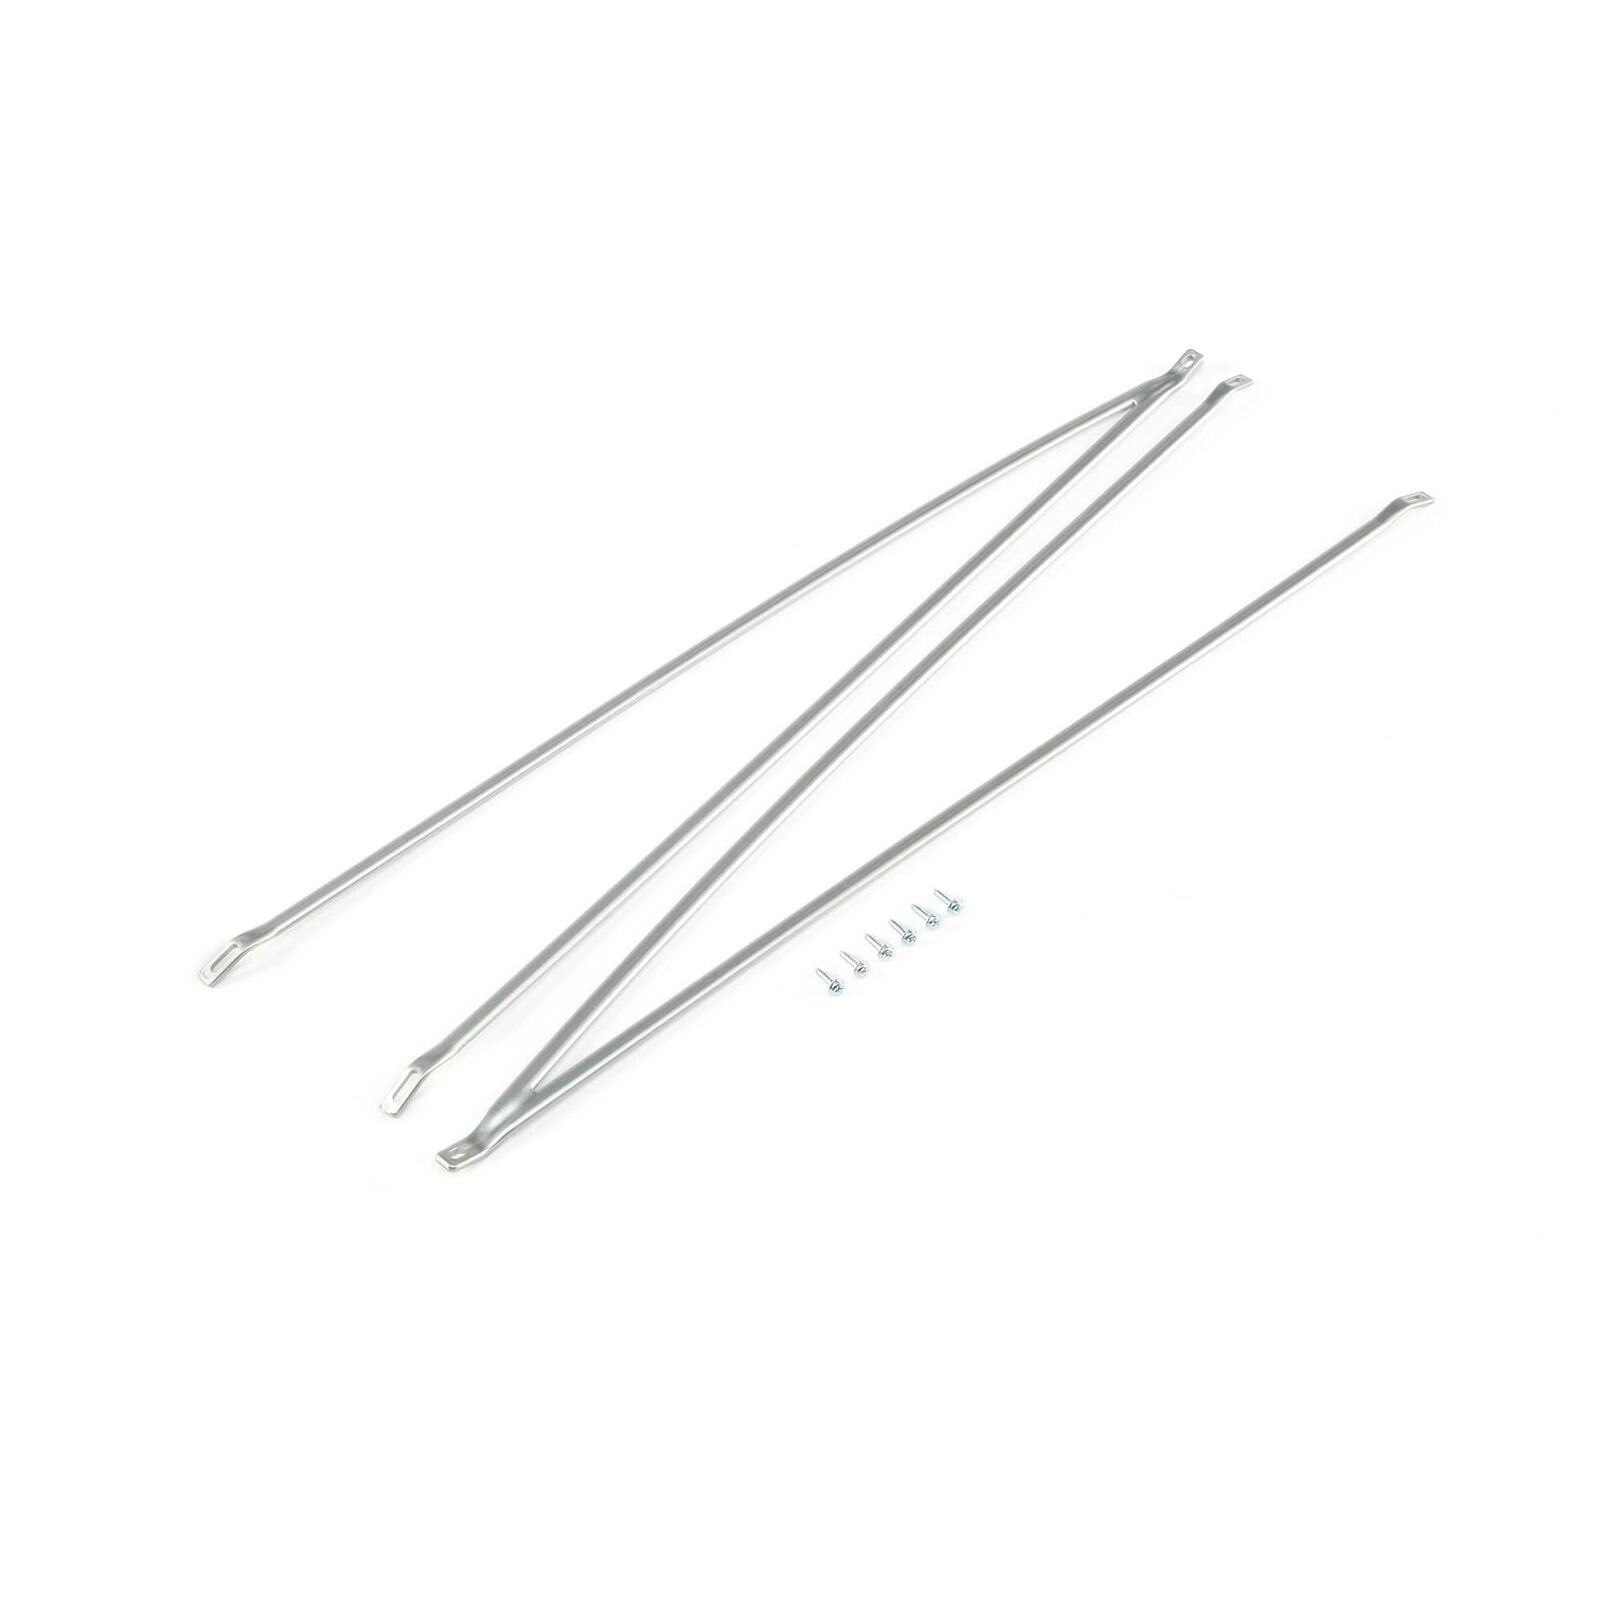 HobbyZone Wing Struts Carbon Cub S+ 1.3m HBZ3226 Replacement Airplane Parts